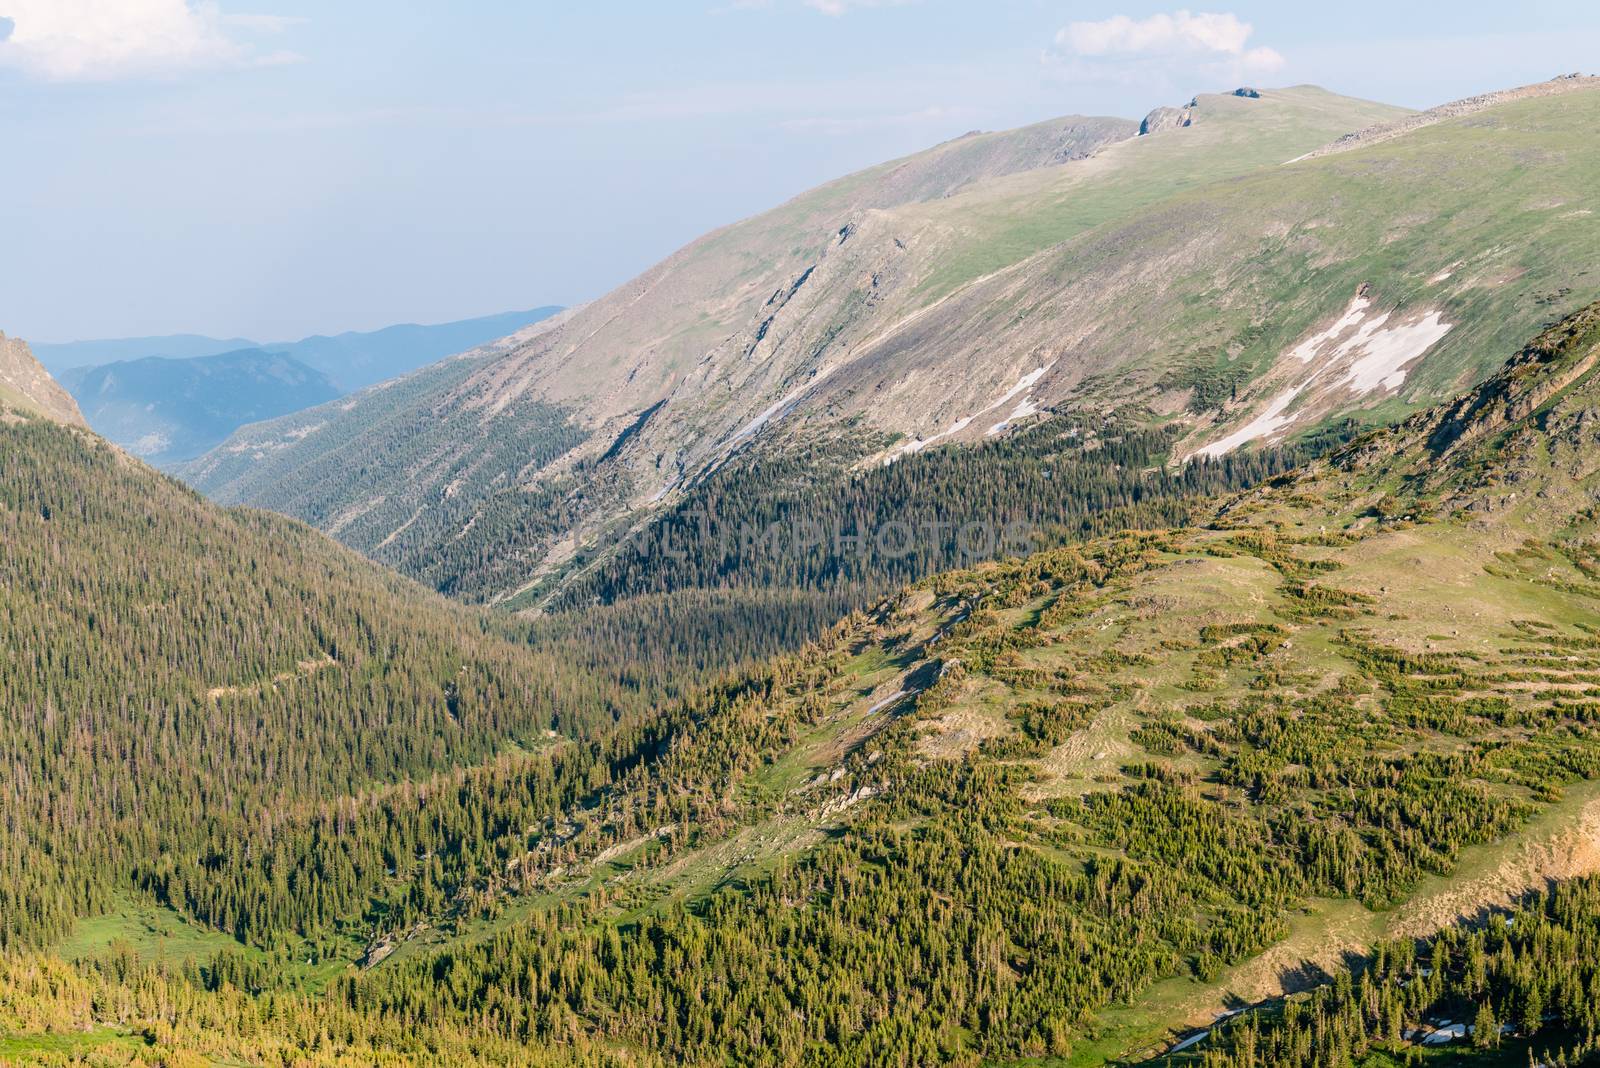 Trail Ridge Road to the alpine tundra in Rocky Mountain National Park, Colorado by Njean